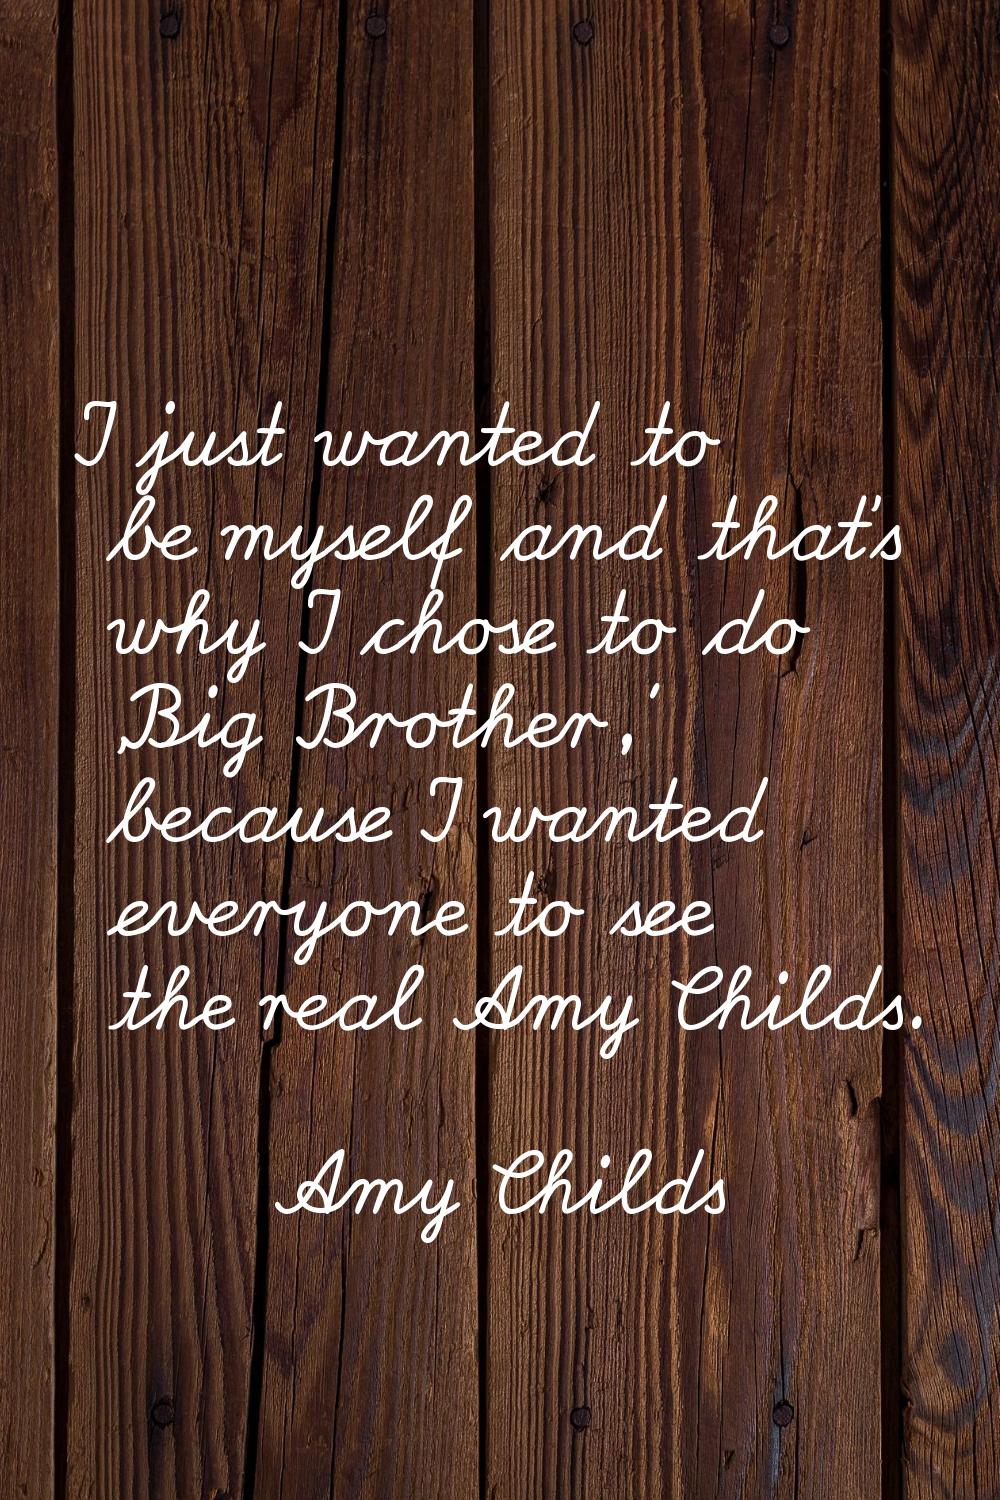 I just wanted to be myself and that's why I chose to do 'Big Brother,' because I wanted everyone to